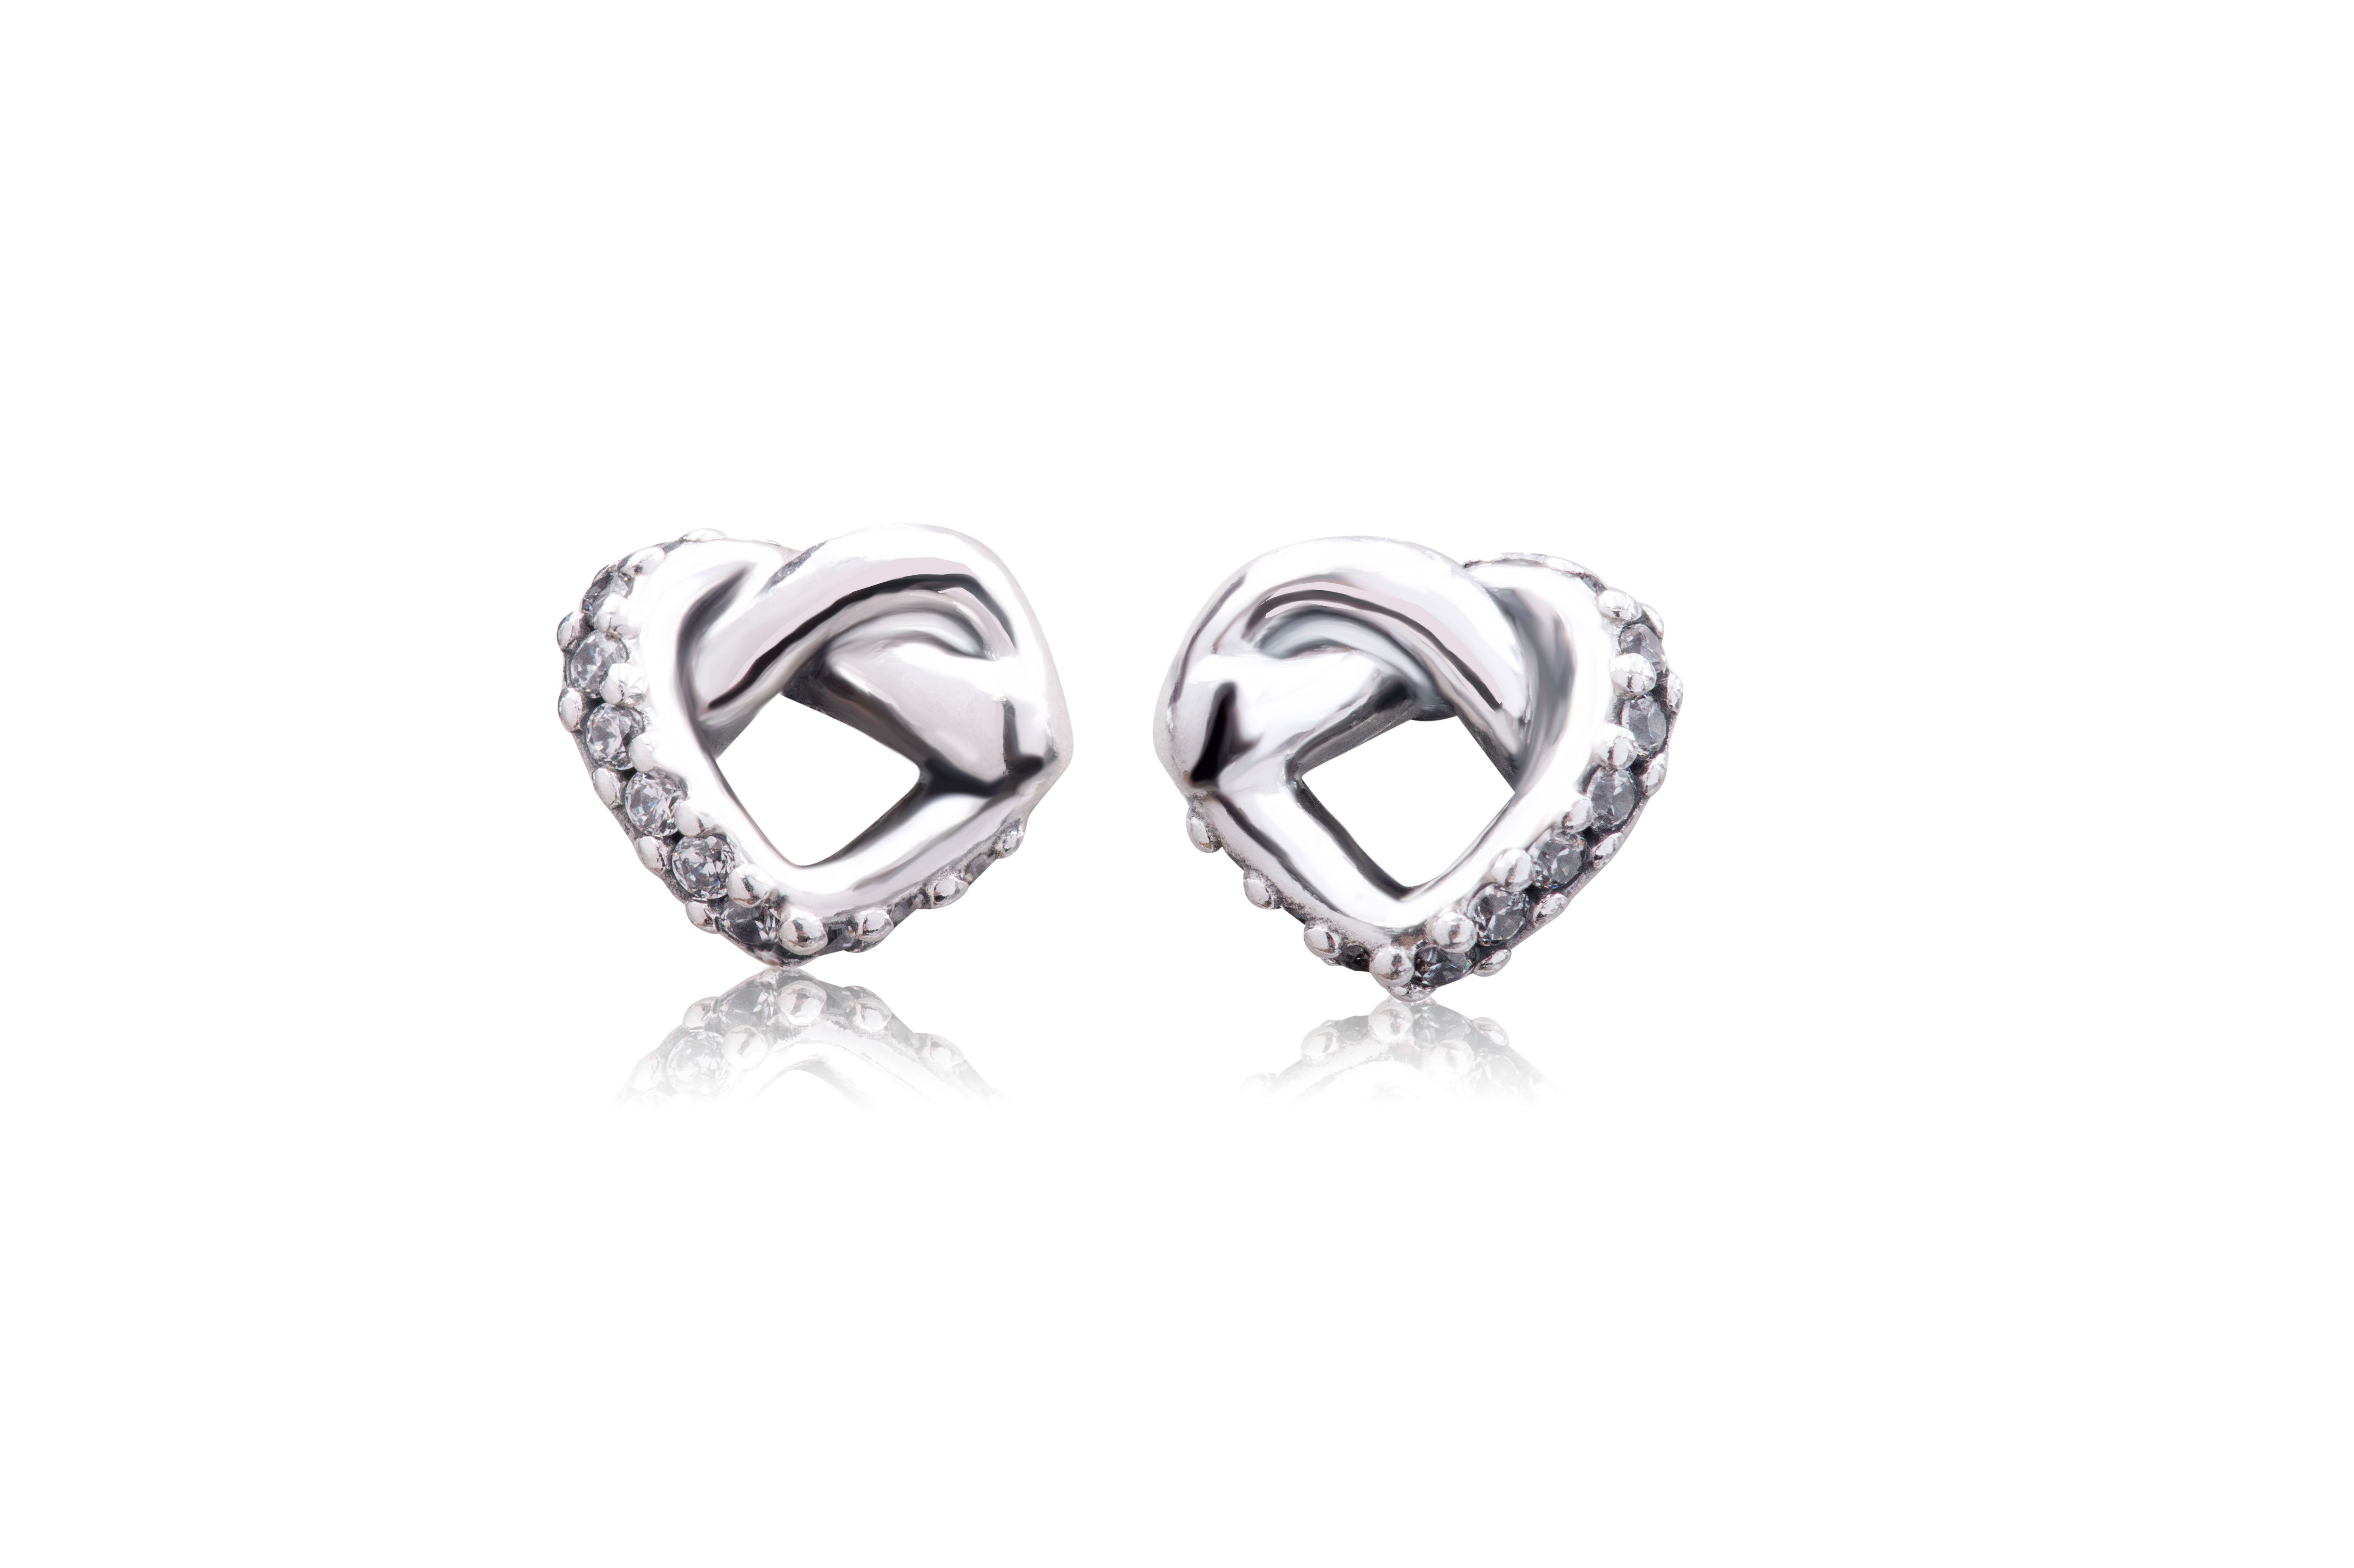 PANDORA Knotted Hearts 925 Sterling Silver Earrings - 298019CZ